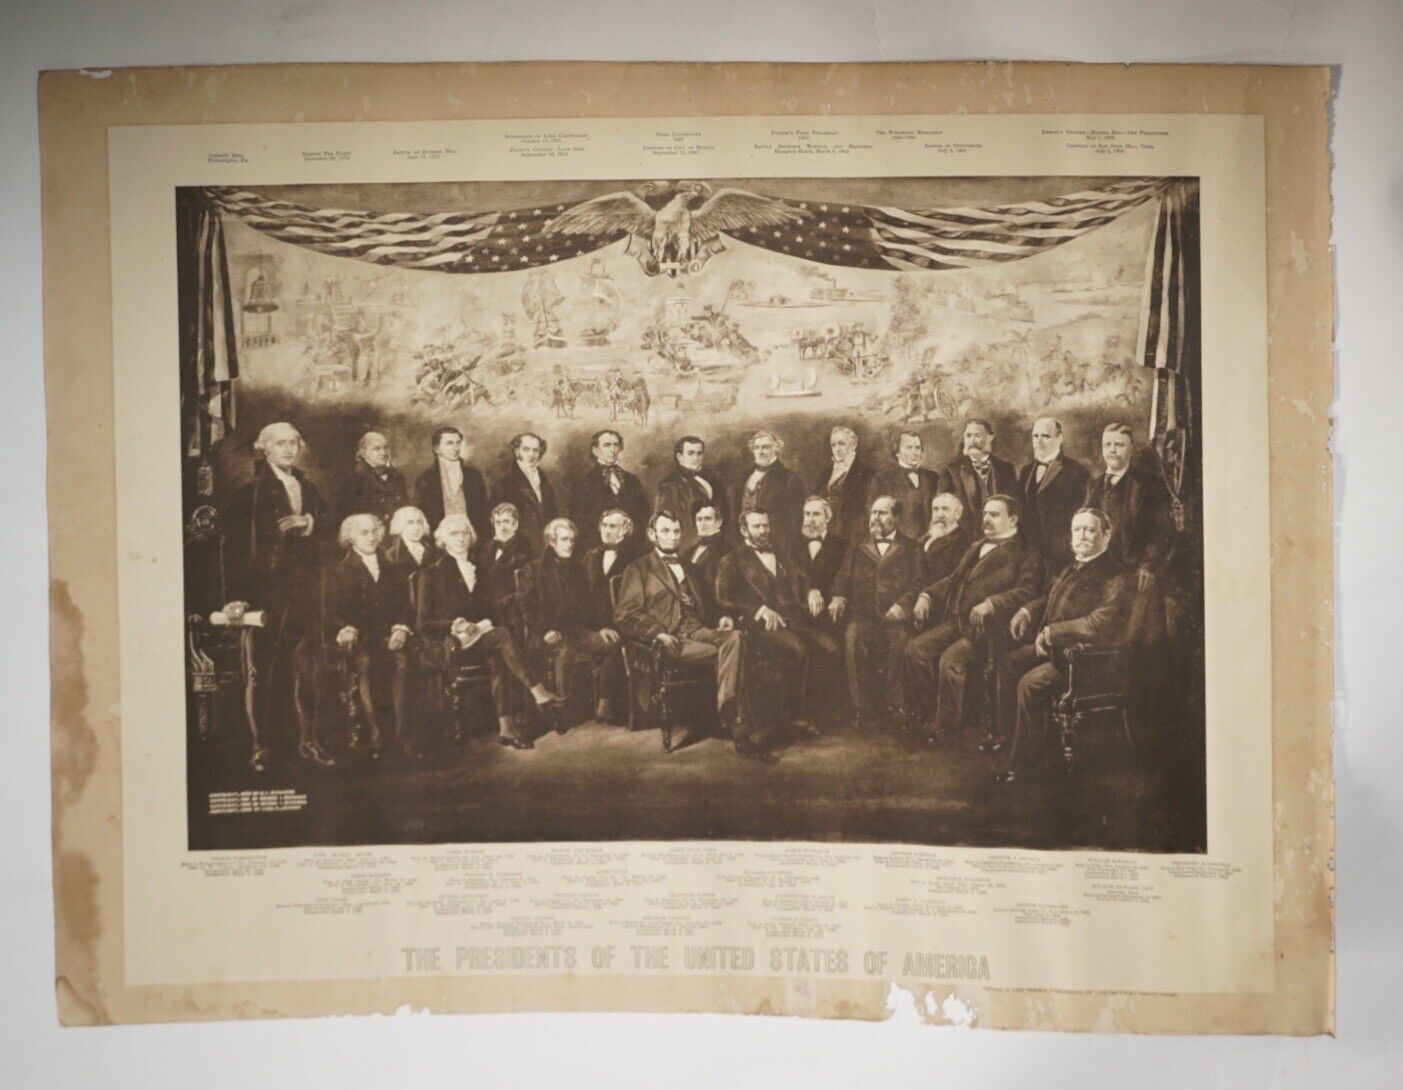 The 26 Presidents of the U S (Issued by Chicago Chamber of Commerce) 27.5” 1900s